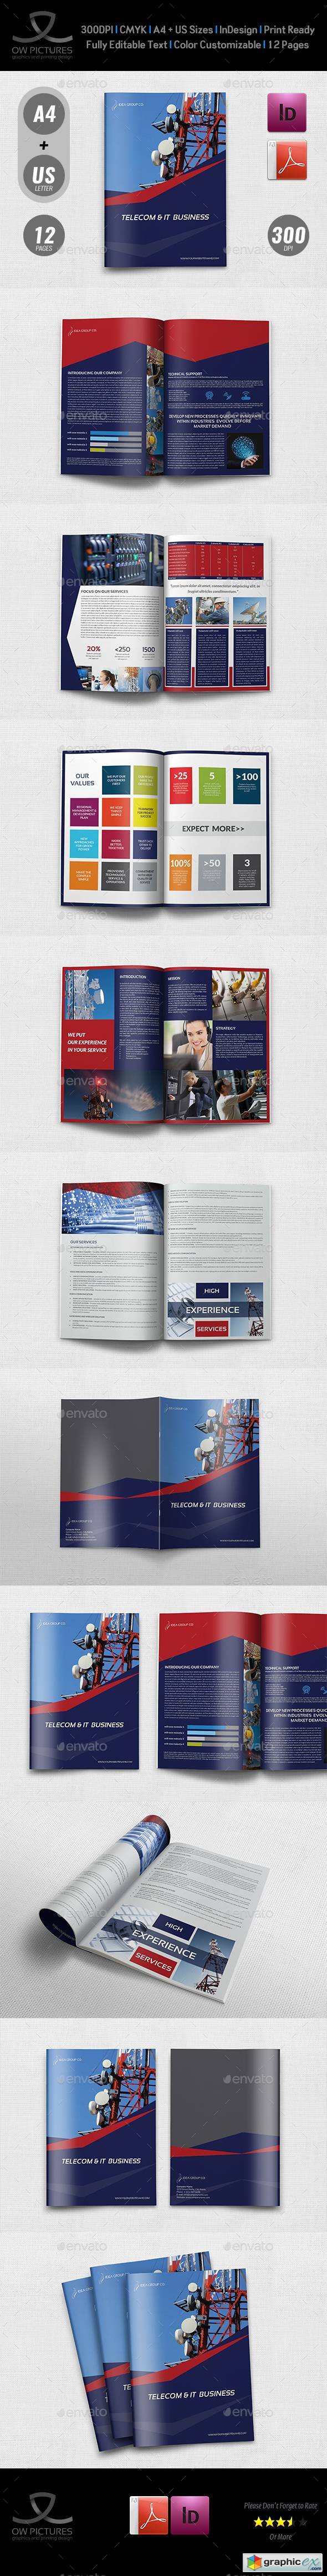 Telecom Services Brochure Template - 12 Pages